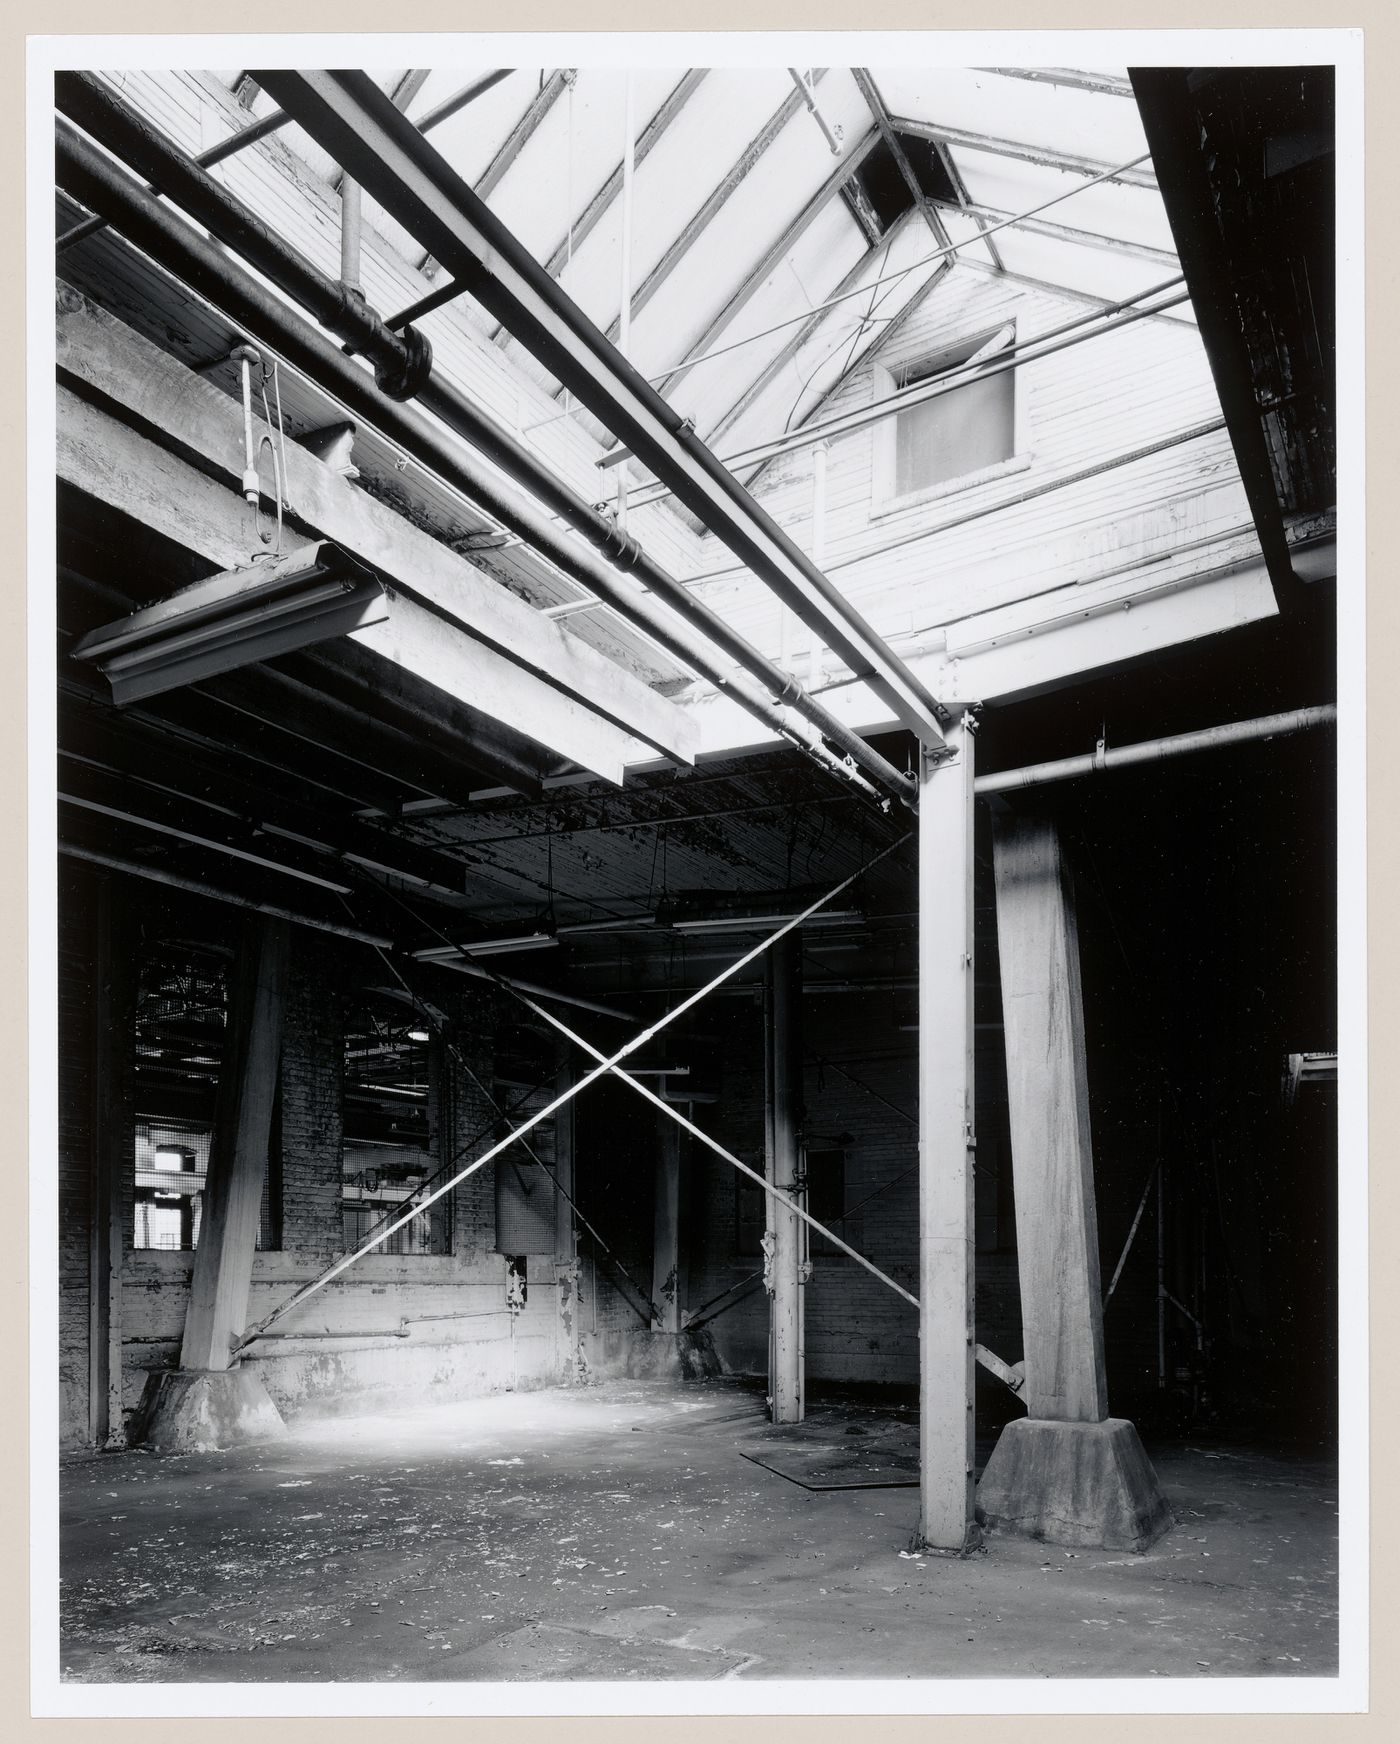 Interior view of the Canadian Switch & Spring Company Building showing the support structure for the water tower on the roof, Montréal, Québec